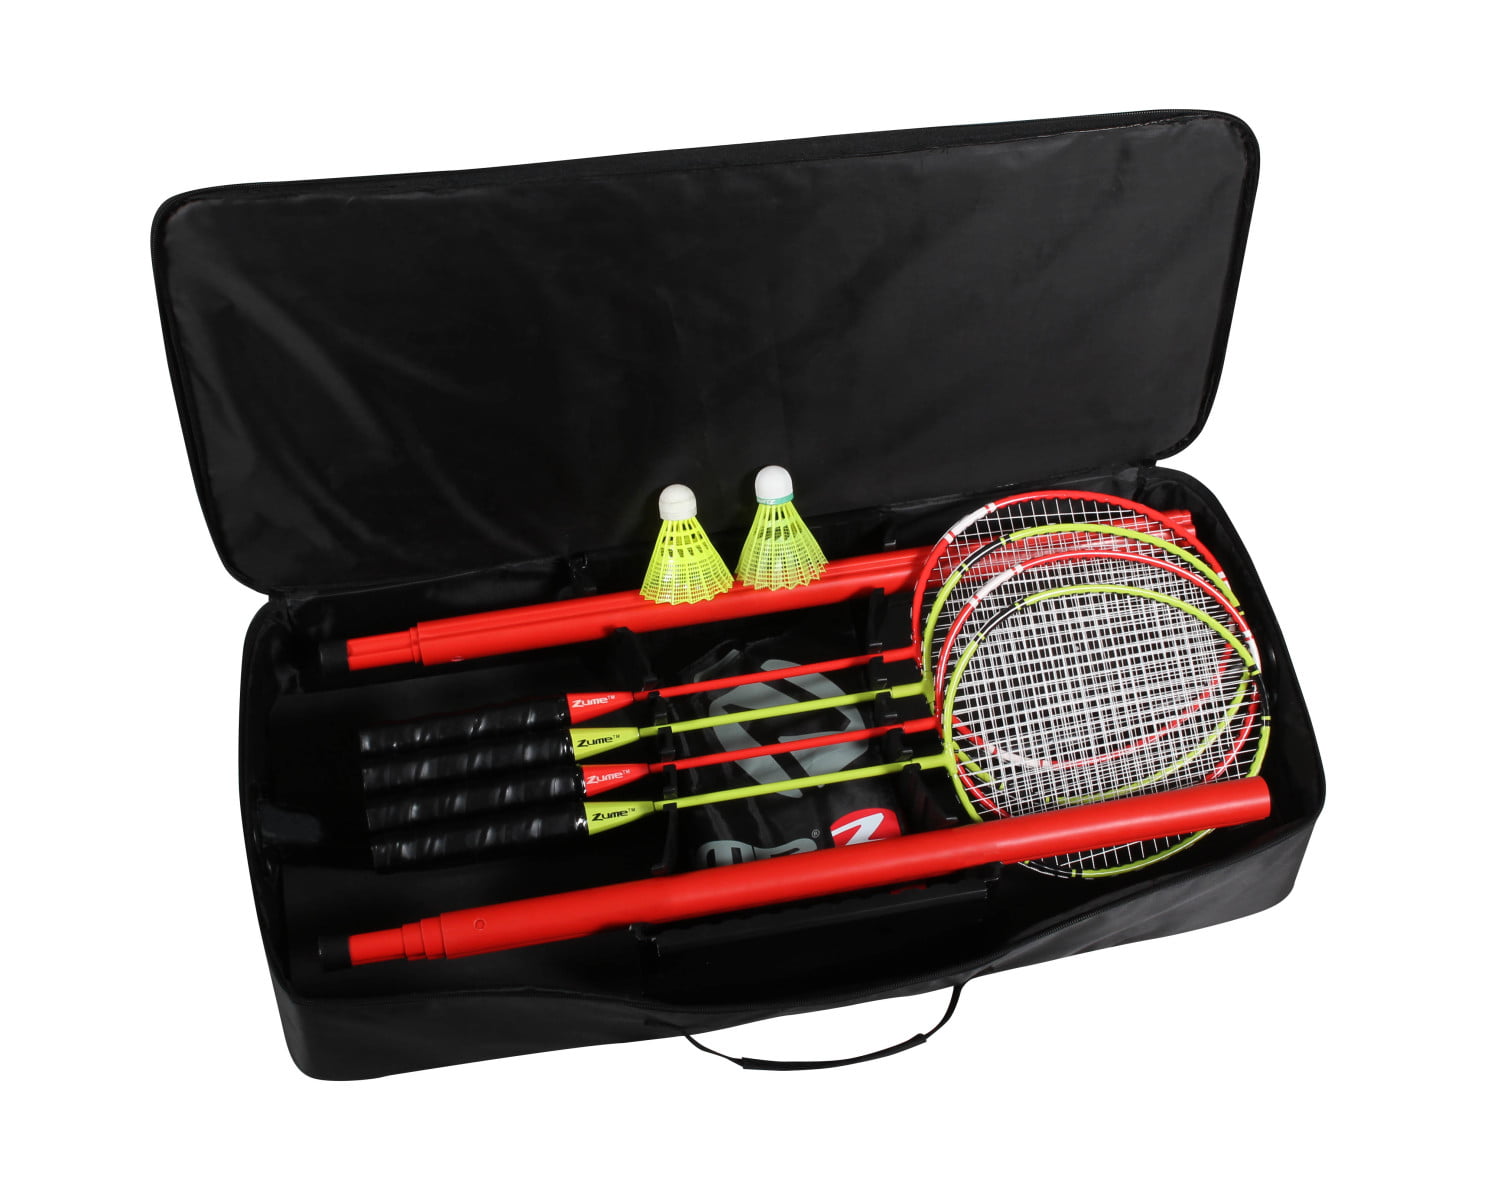 Details about    Games Portable Badminton Set with Freestanding Base Sets Up Red/Black/Green 